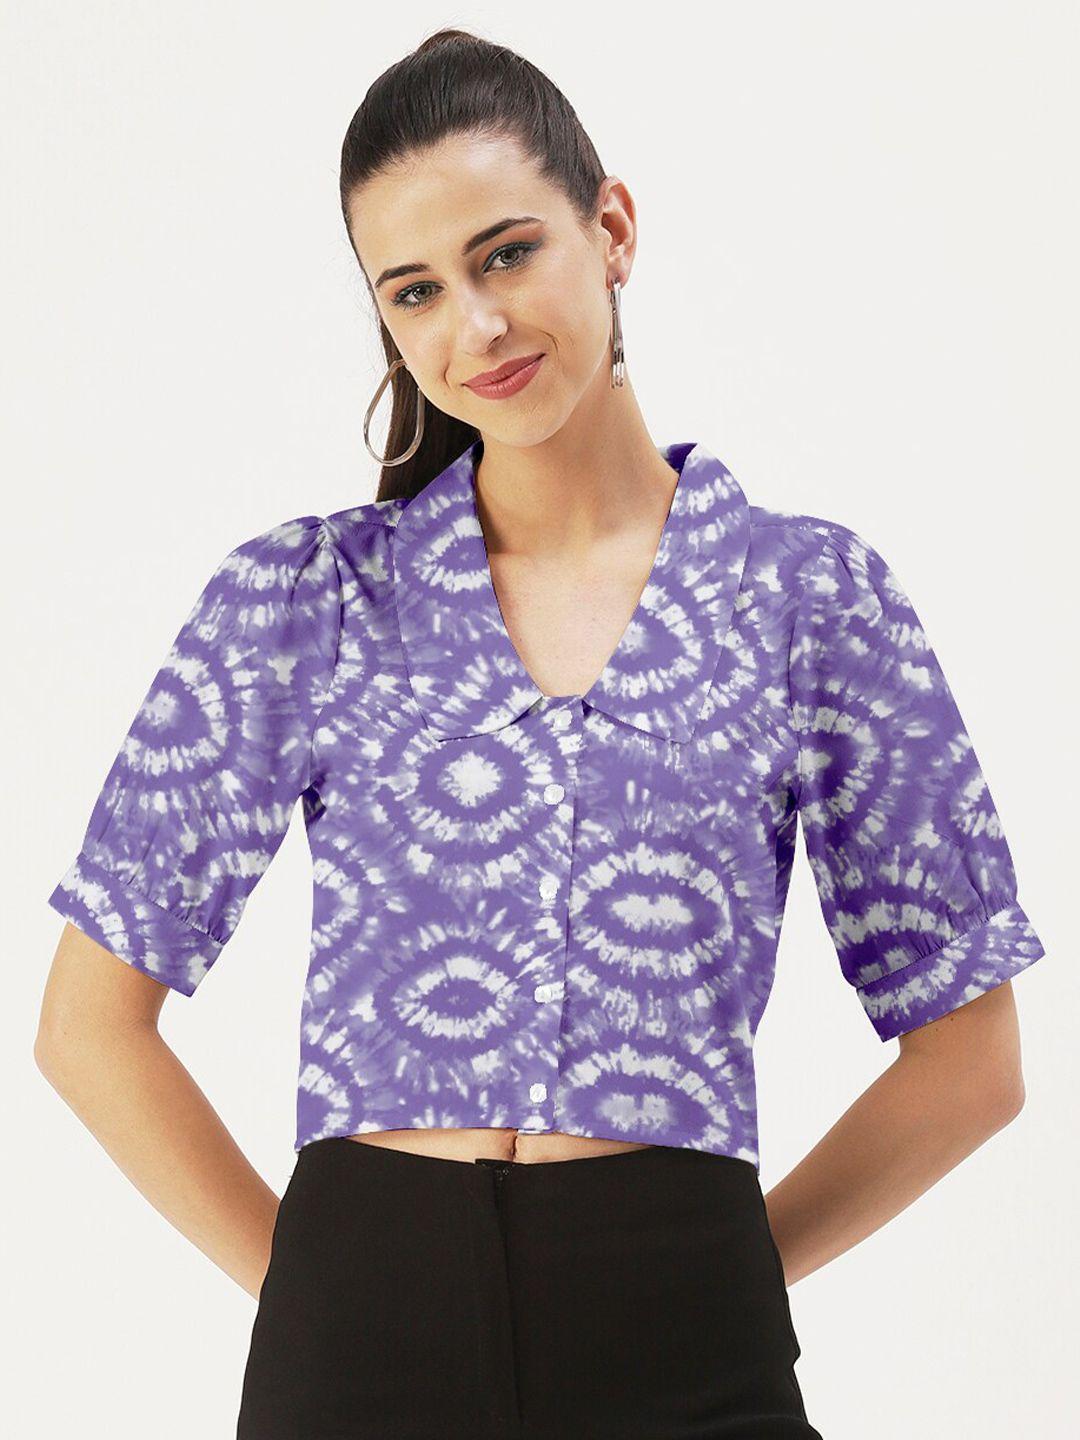 dressberry tie and dye crepe shirt style crop top